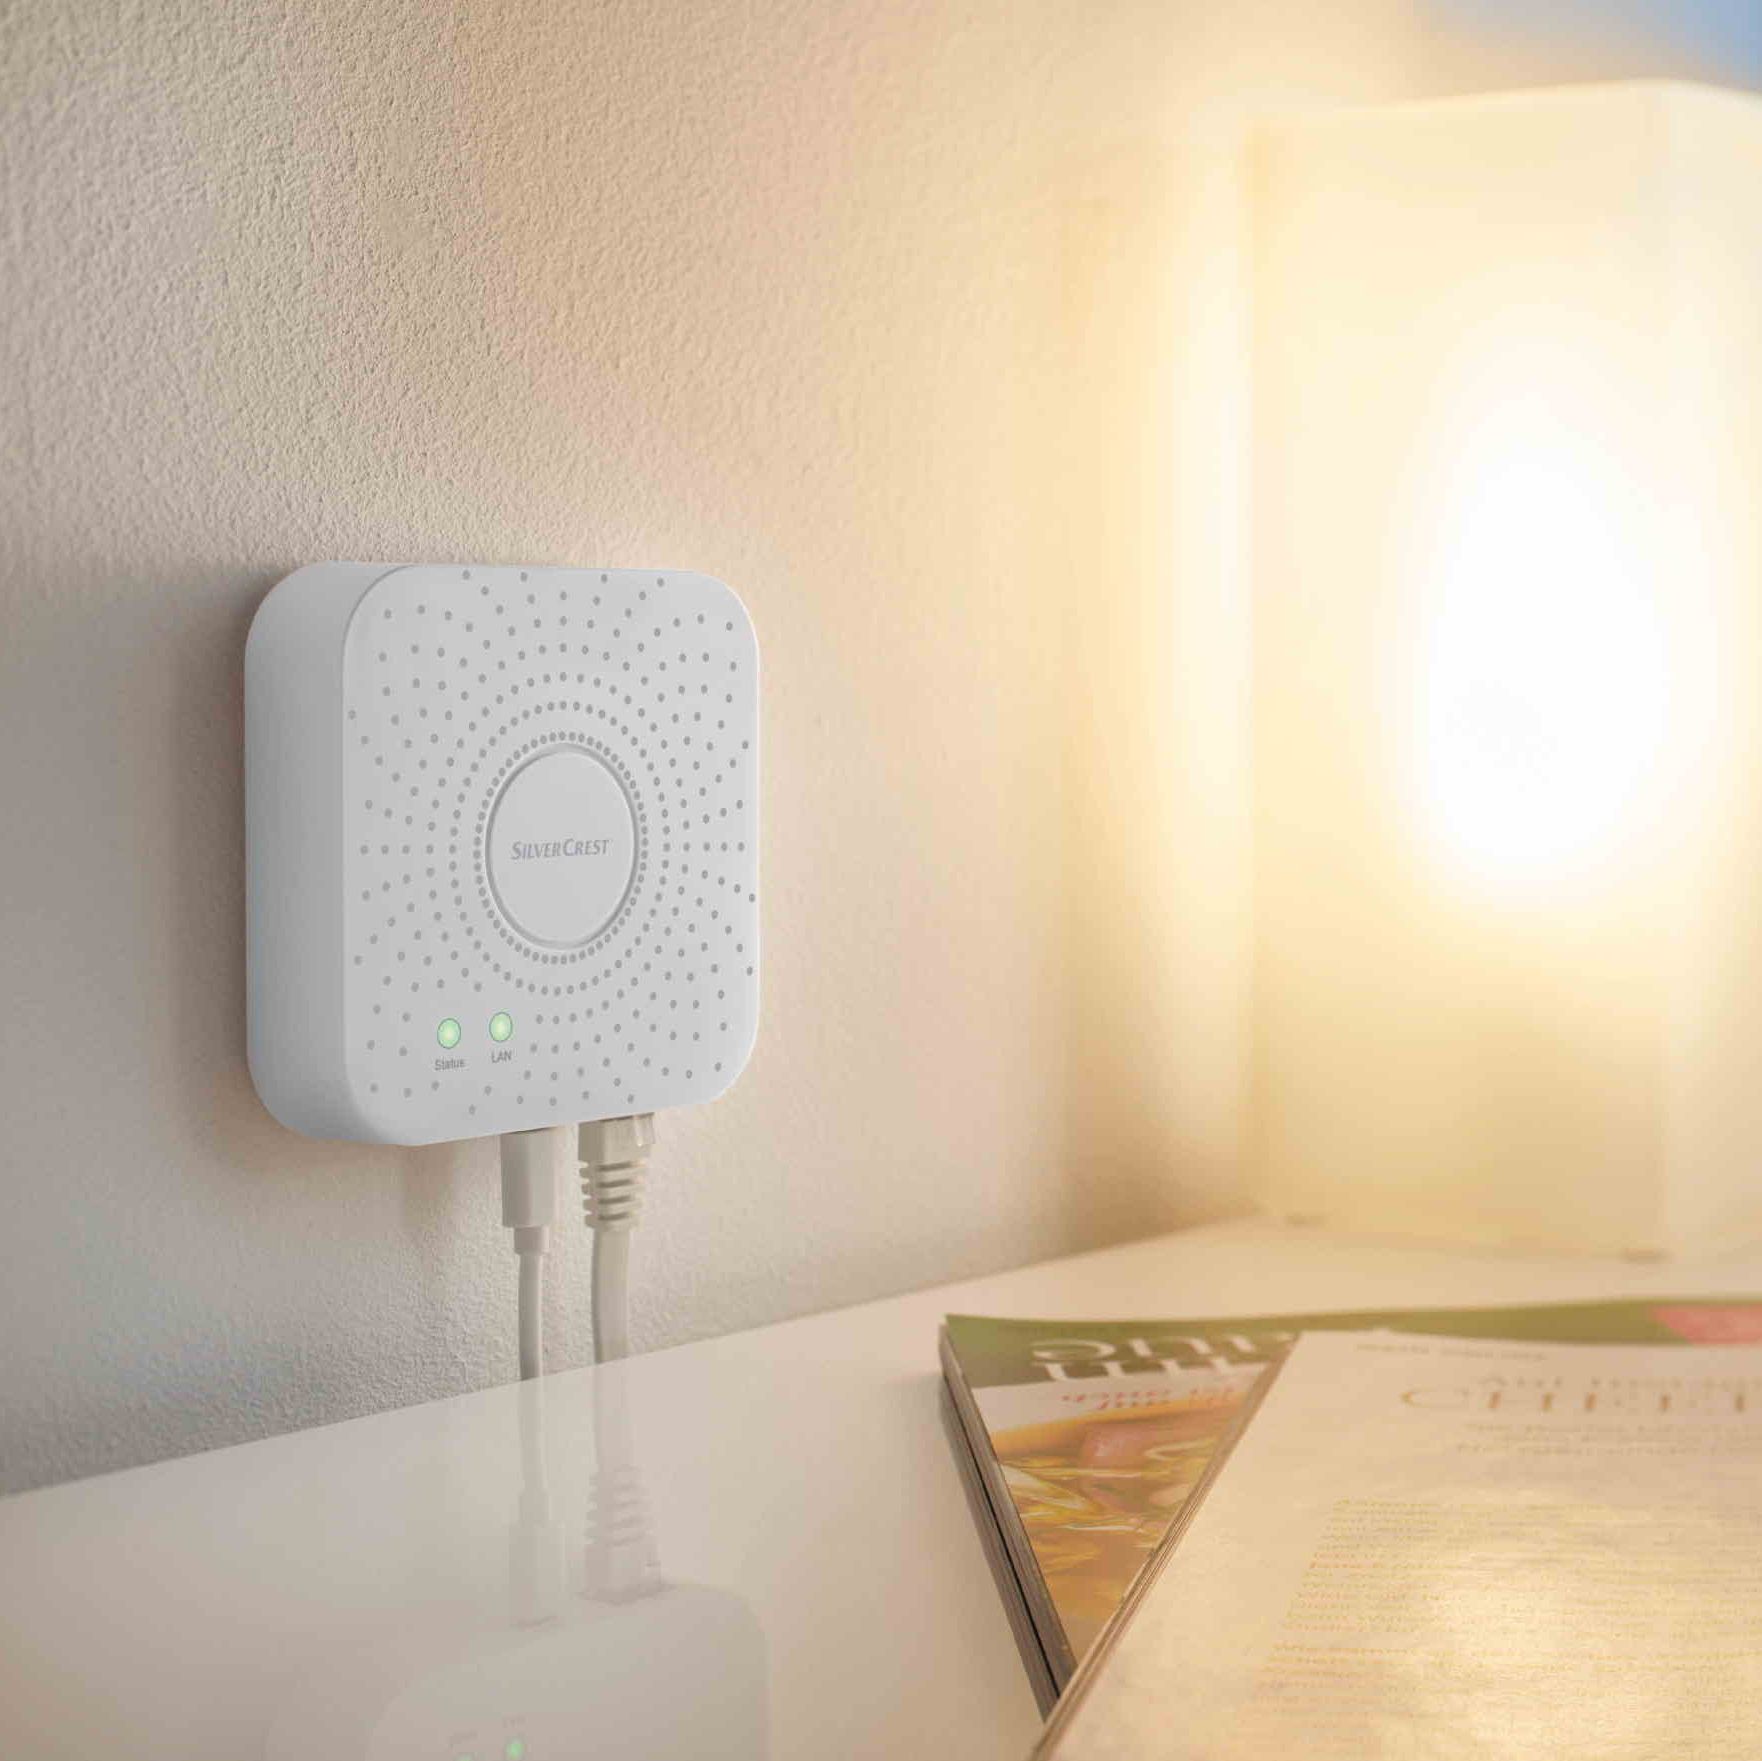 Lidl\'s Smart Home Range Starts From Just £7.99 - Lidl Offers